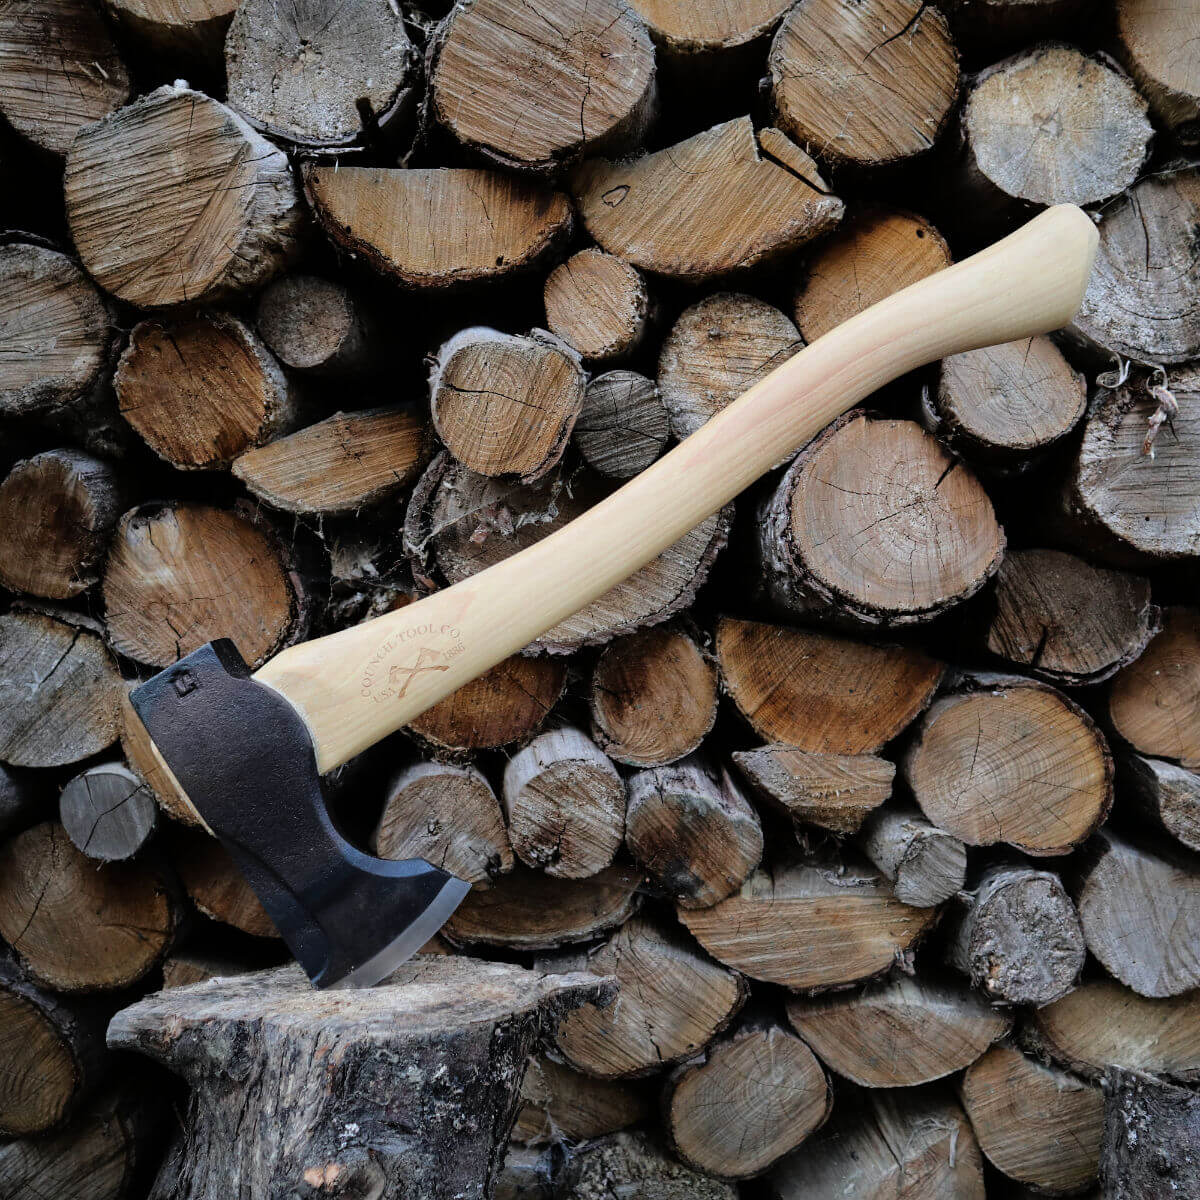 Council Tool Wood-Craft Pack Axe